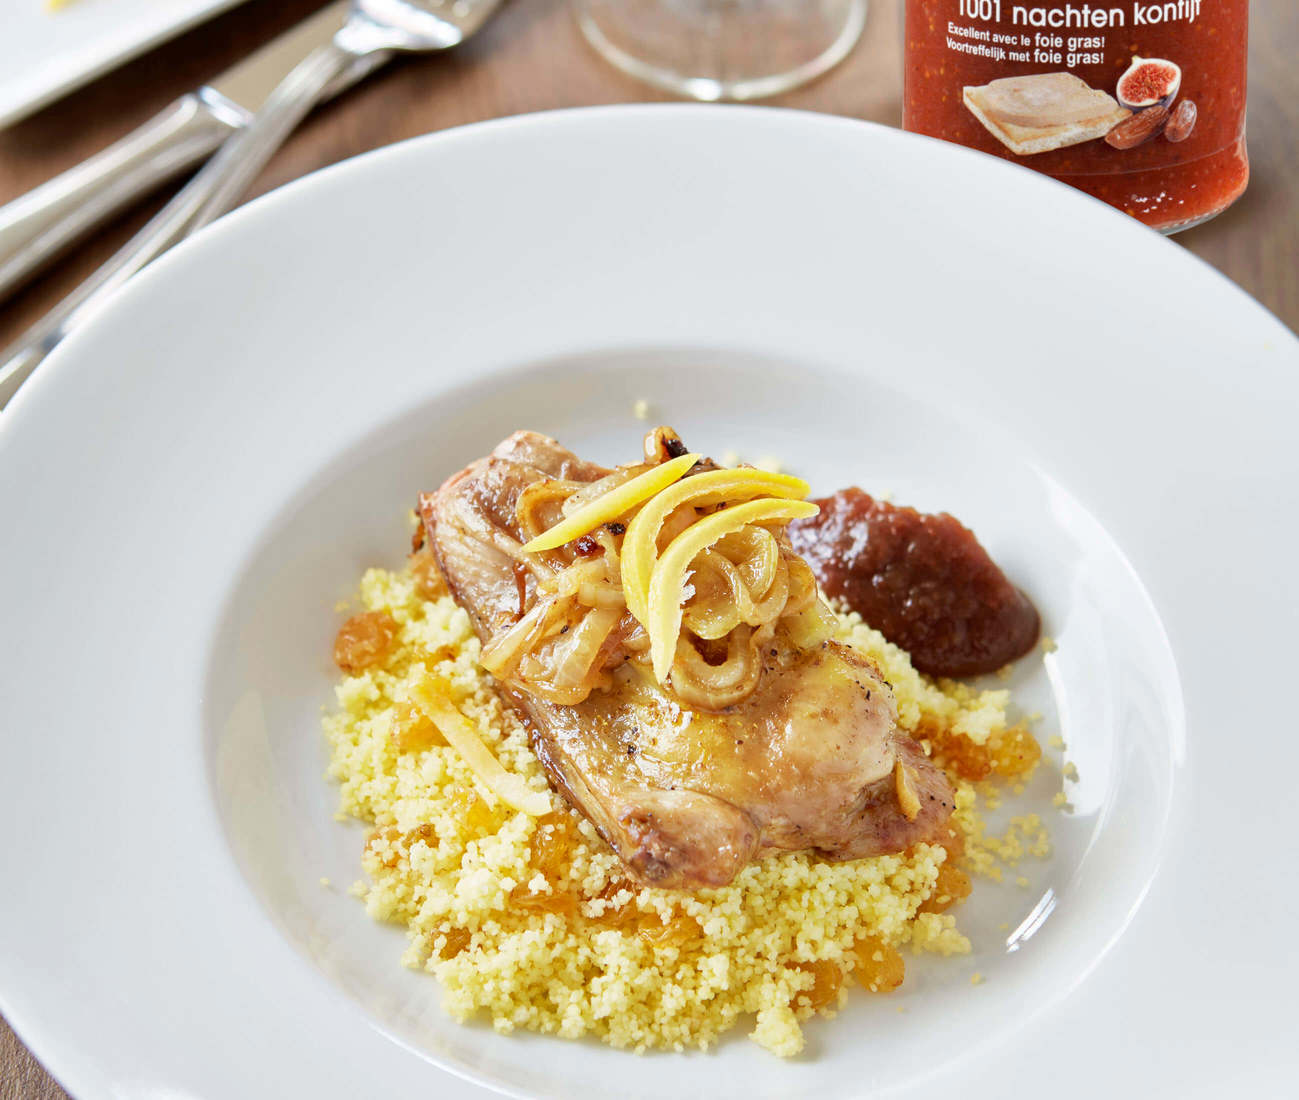 Chicken Tagine with 1001 Nights Confit